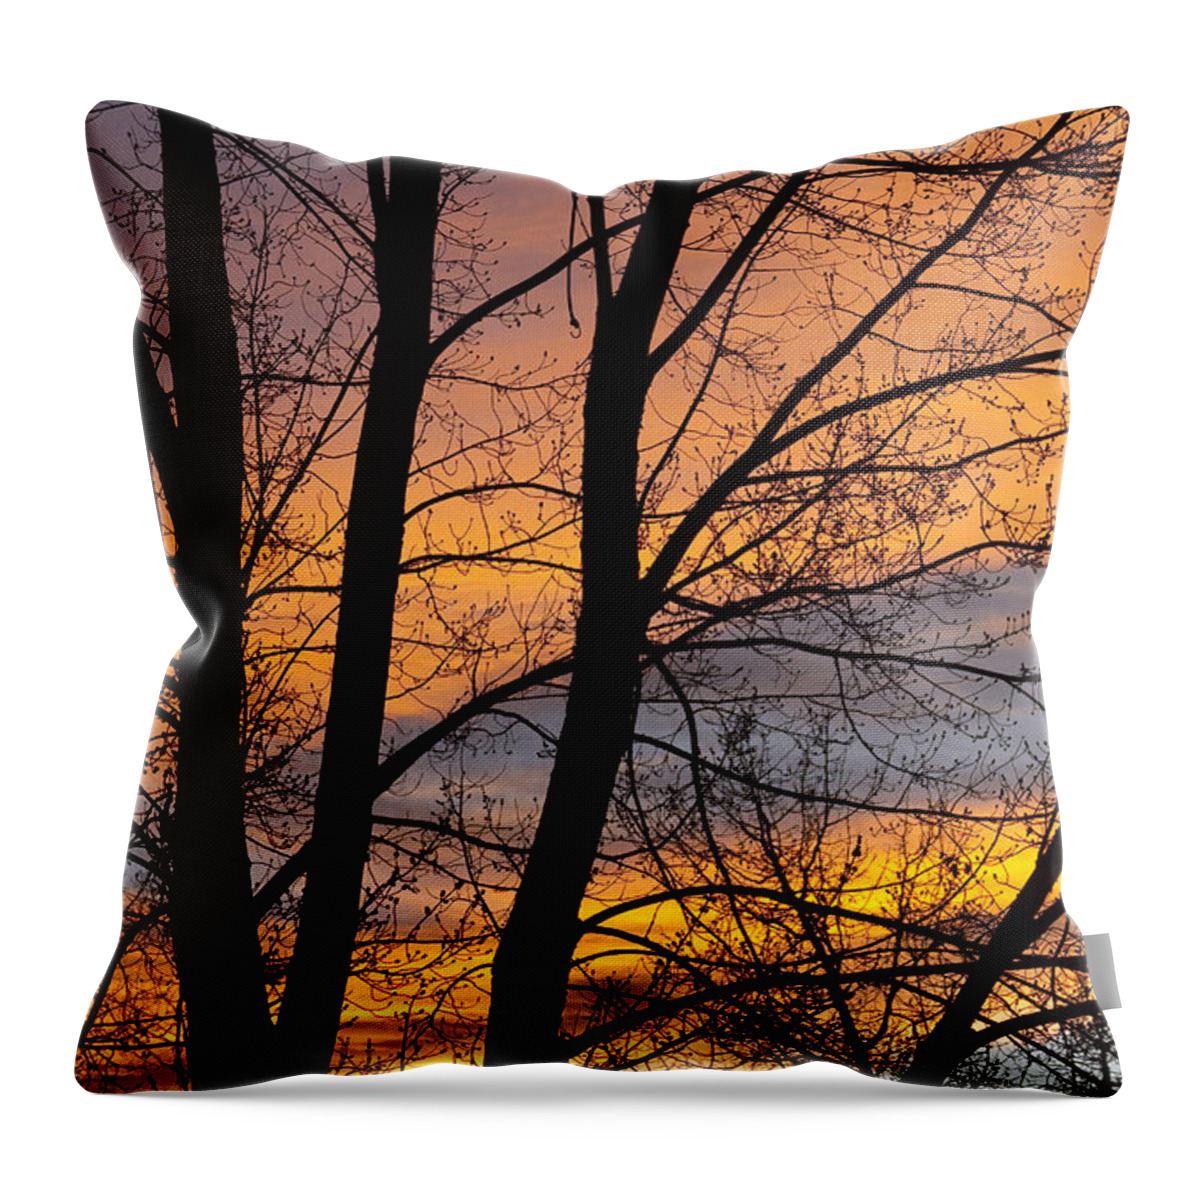 Silhouette Throw Pillow featuring the photograph Sunset Through the Tree Silhouette by James BO Insogna